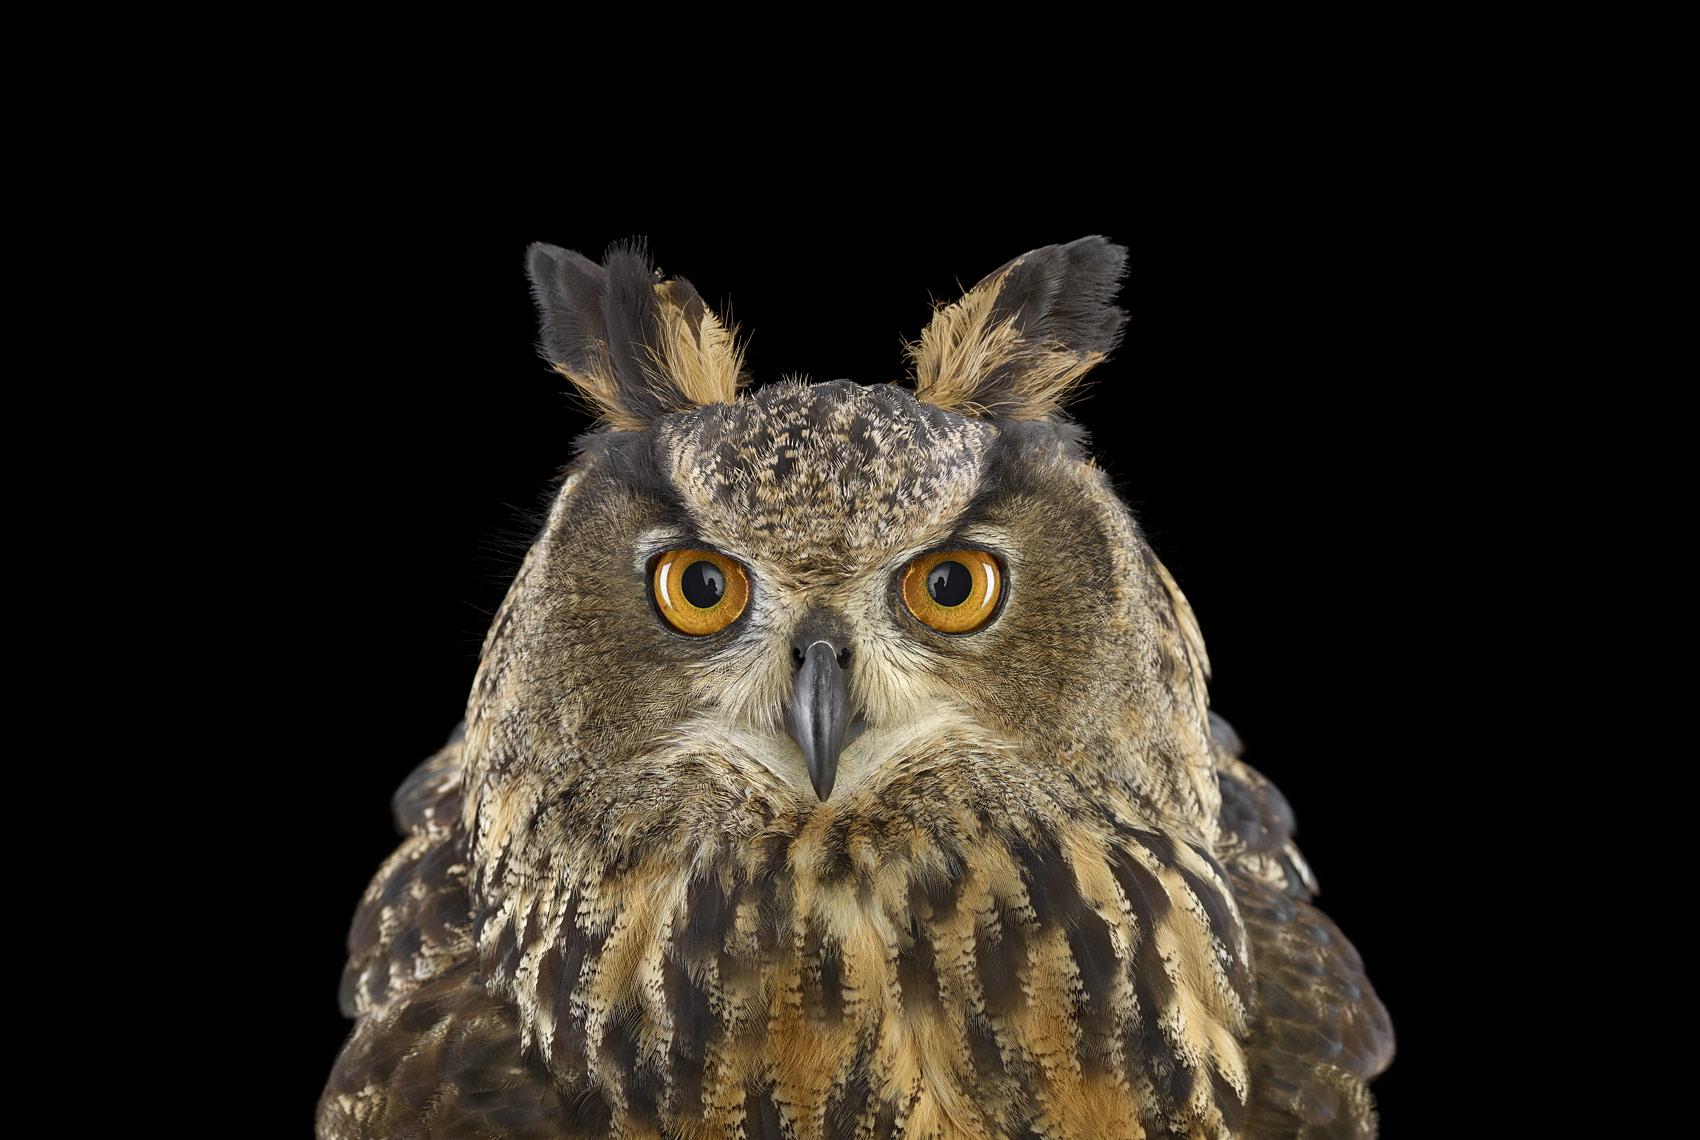 'Eurasian Eagle Owl #1, St Louis, MO, 2012' is a limited-edition photograph by contemporary artist Brad Wilson from the ‘Affinity’ series which features studio portraits of wild animals. 

This photograph is sold unframed as a print only. It is